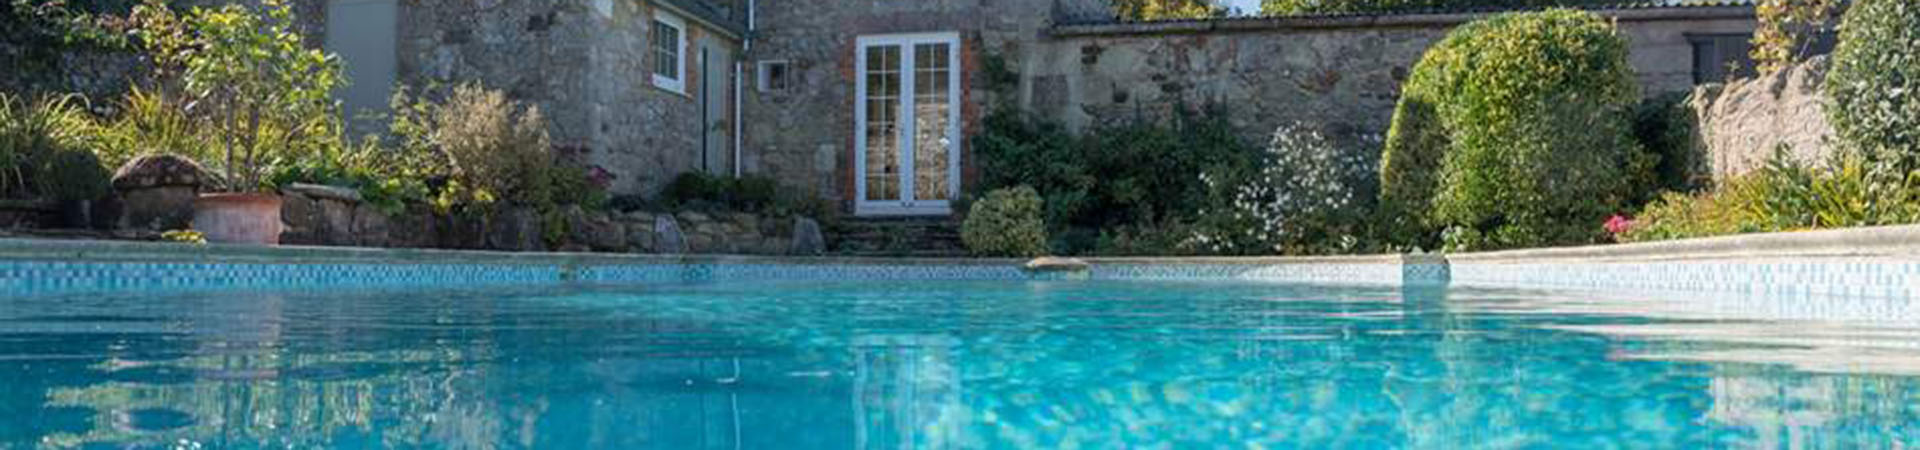 Holiday cottages with pools in Lake District